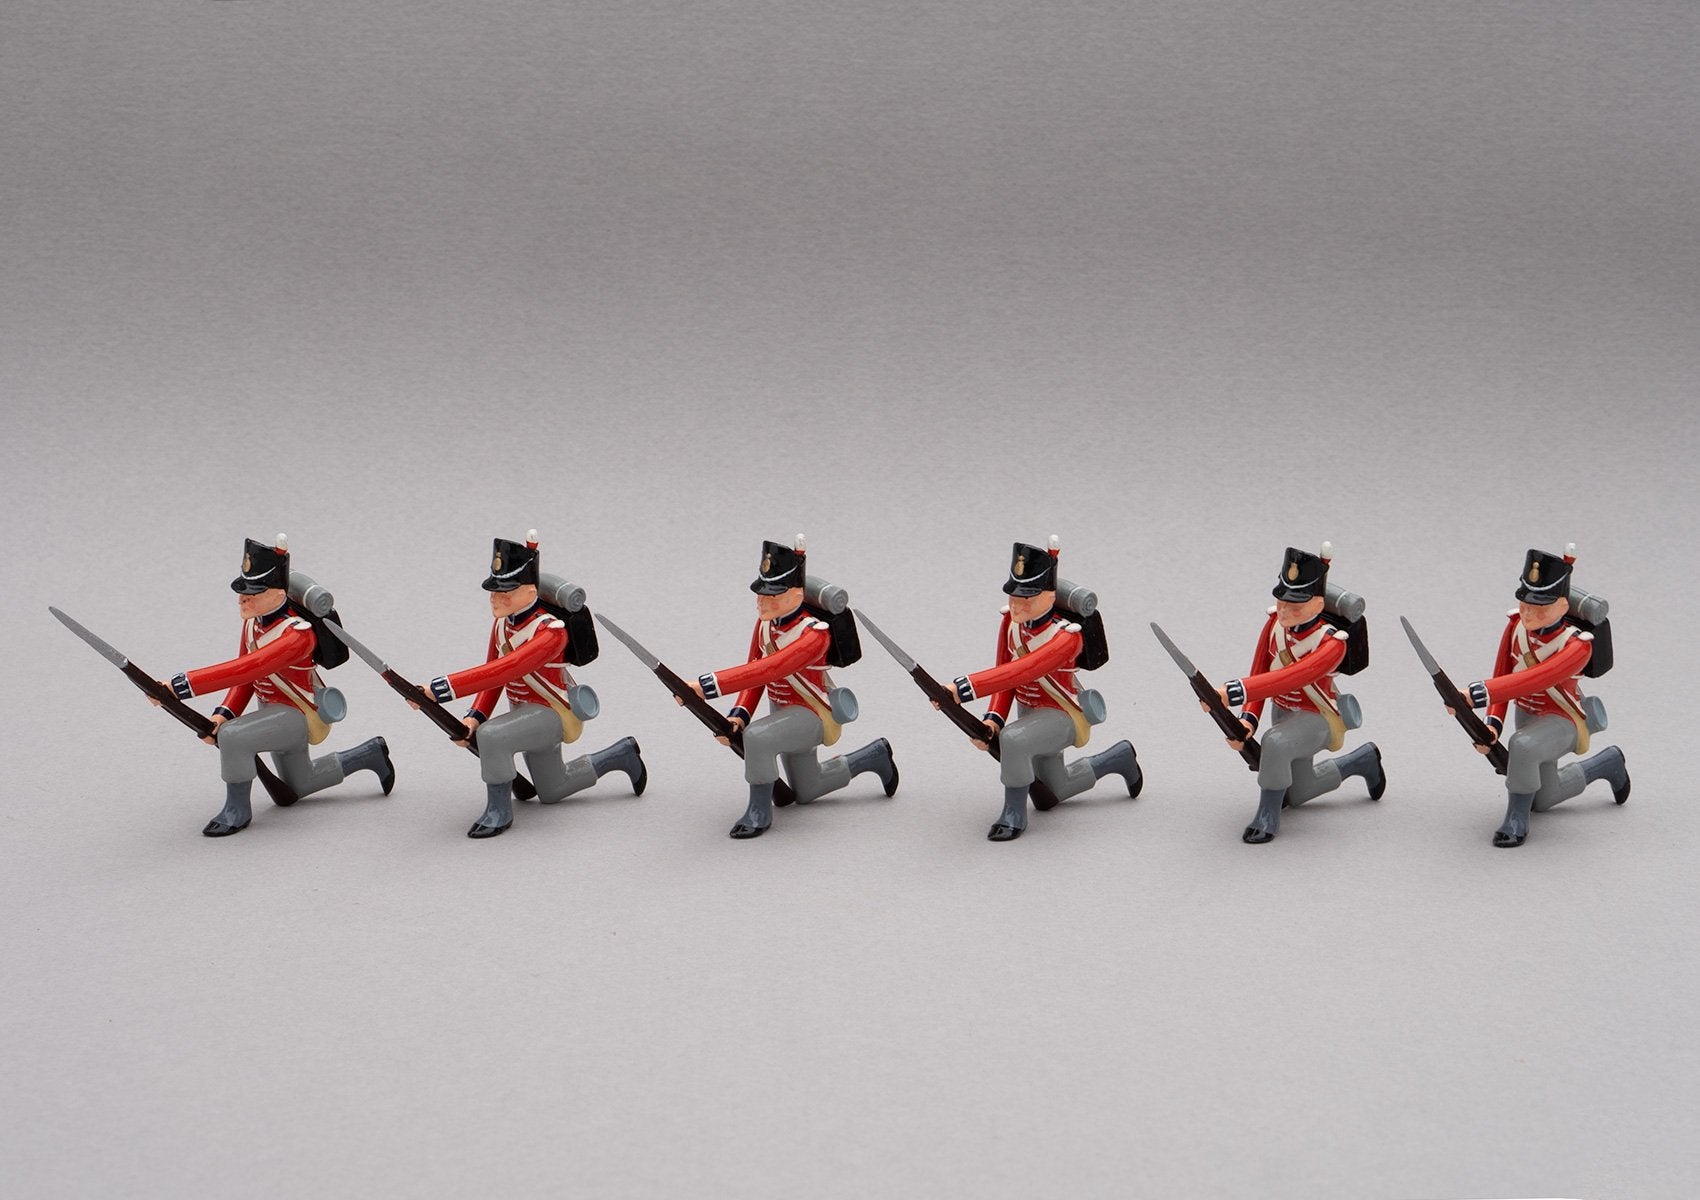 Set 128 1st Foot Guards, Waterloo 1815 | British Infantry | Napoleonic Wars | Six men kneeling ready to resist cavalry as the first rank of a defensive square. 1st Infantry Division | Waterloo | © Imperial Productions | Sculpt by David Cowe